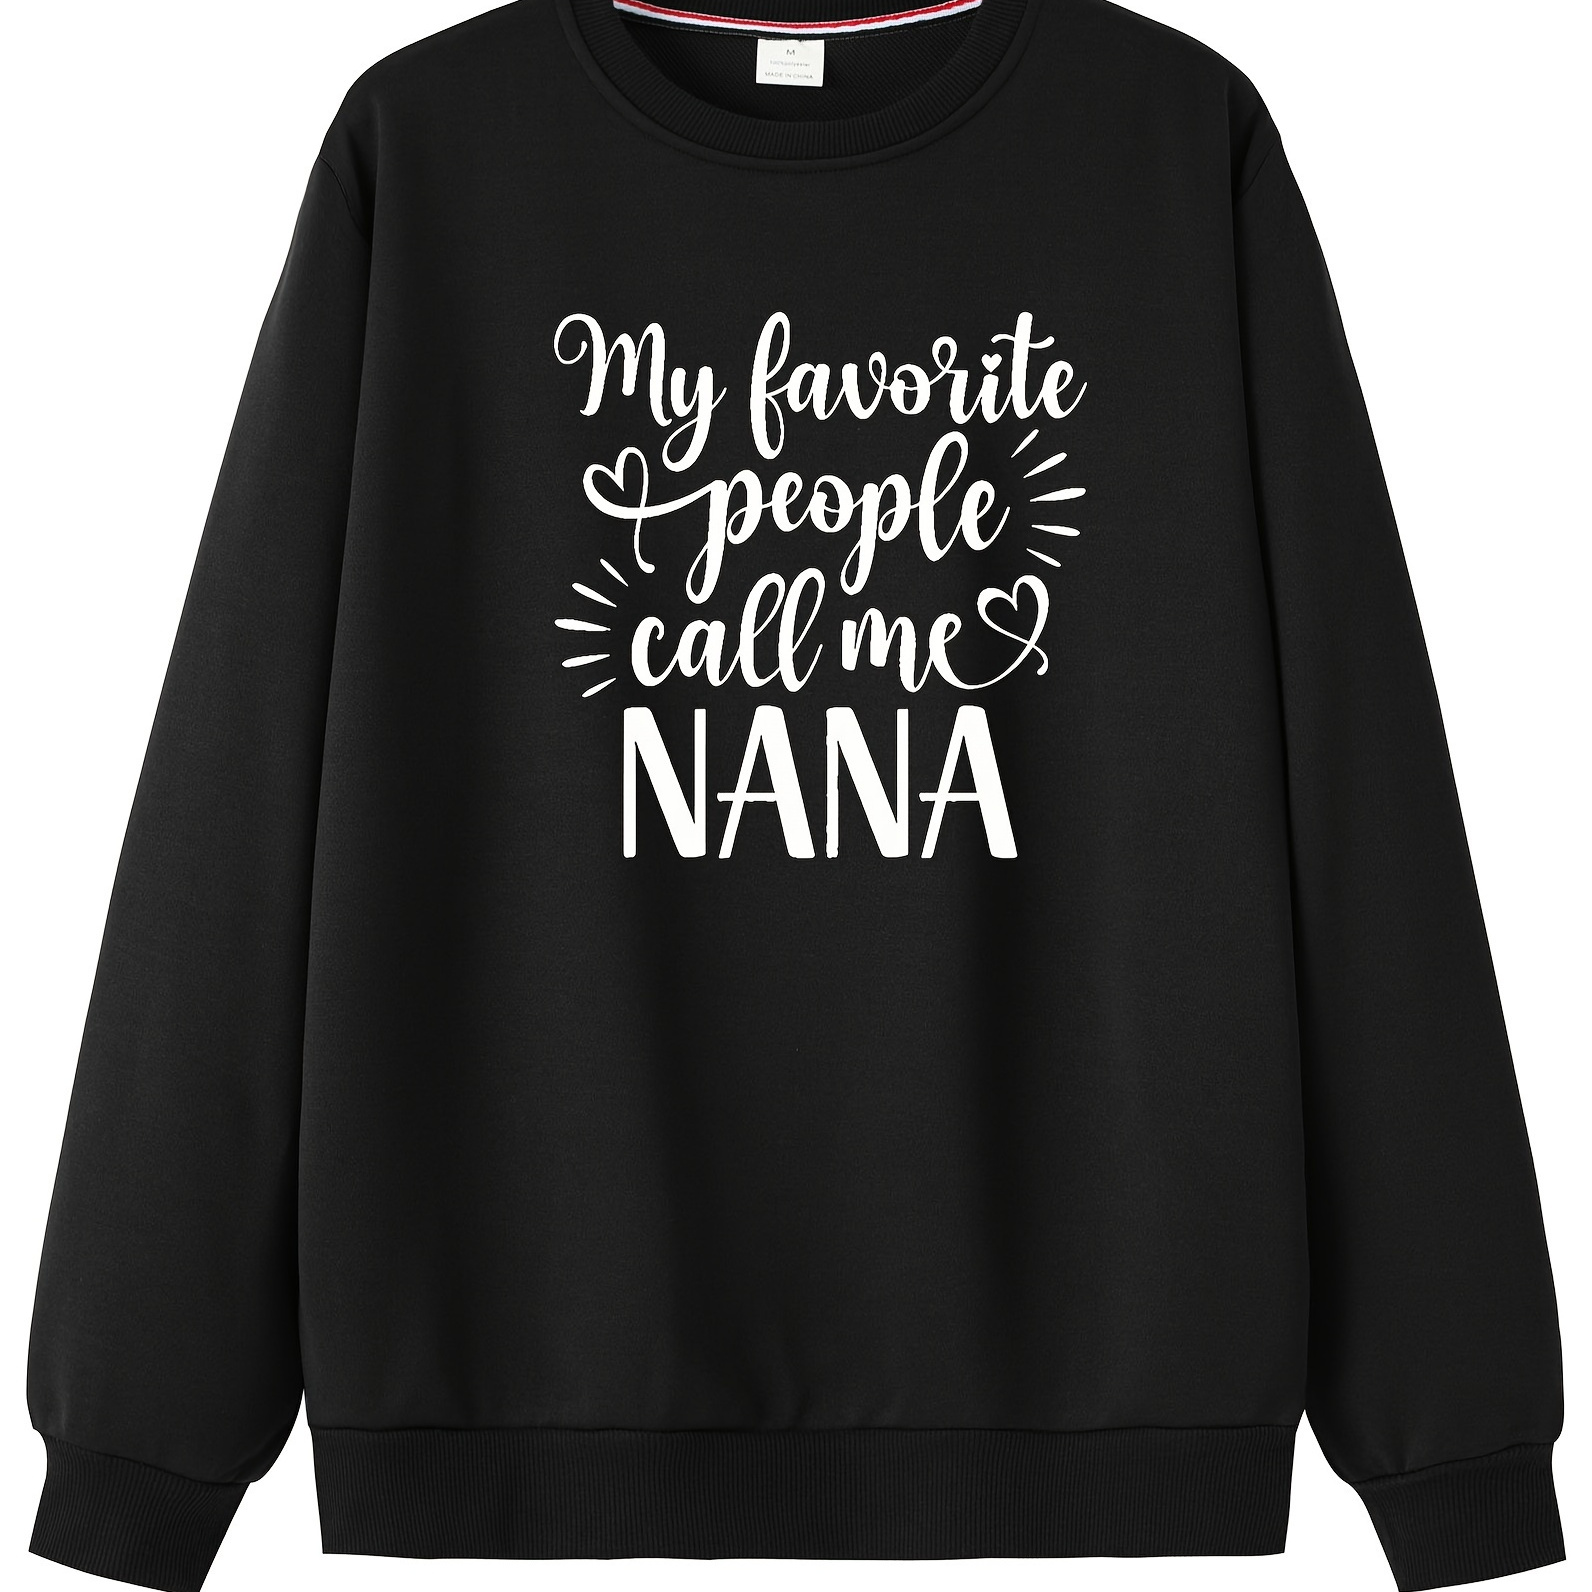 

My Favorite People Call Me Nana And Heart Graphic Print, Sweatshirt With Long Sleeves, Men's Creative Slightly Flex Crew Neck Pullover For Spring Fall And Winter